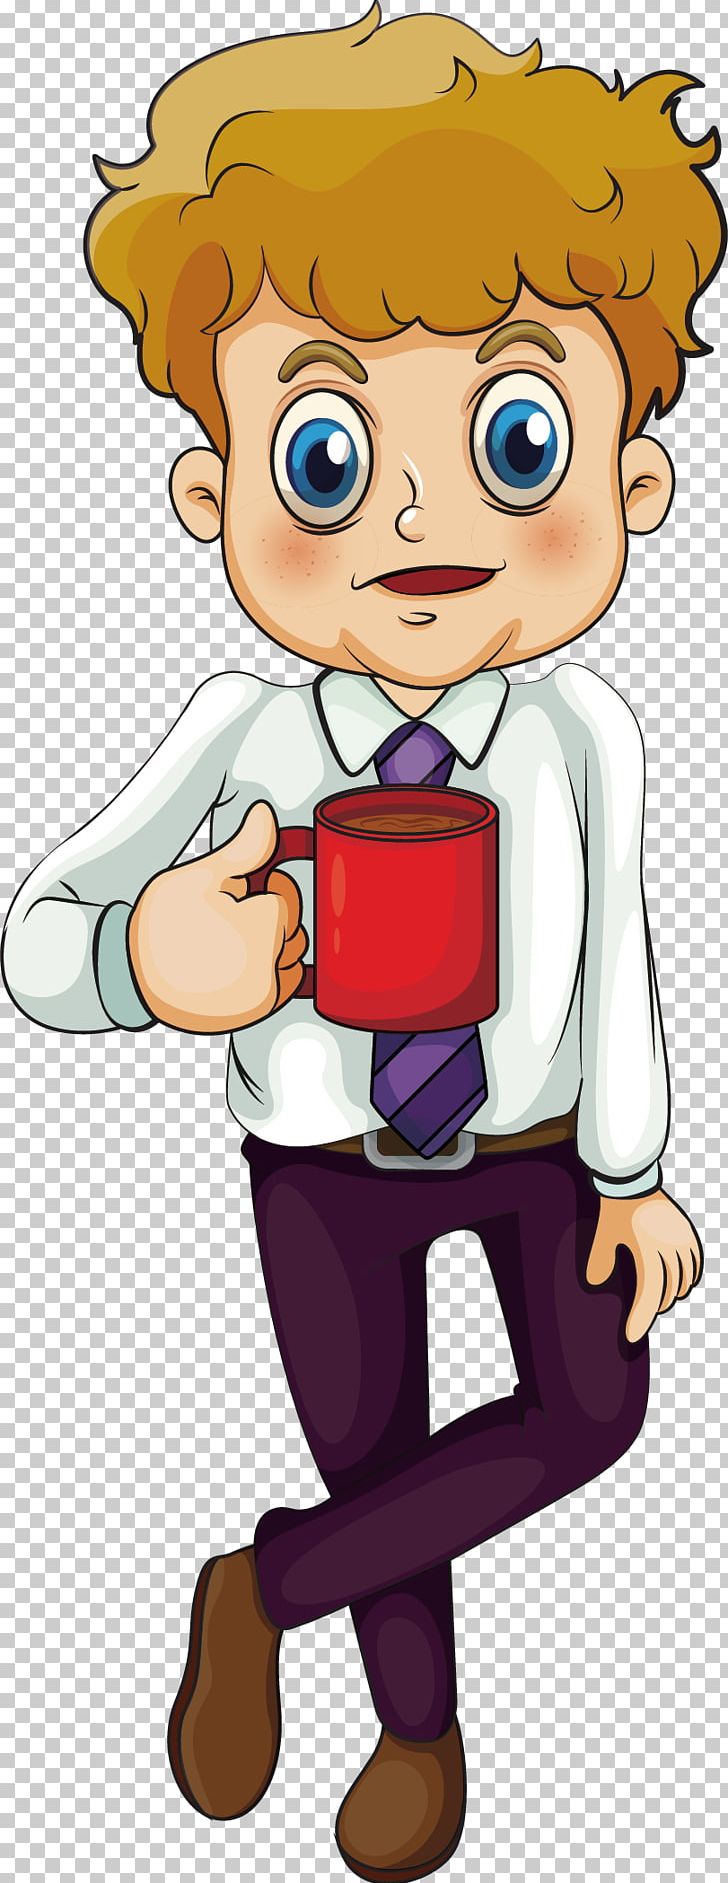 Coffee Tea Drink Illustration PNG, Clipart, Arm, Boy, Business Man, Cartoon, Child Free PNG Download